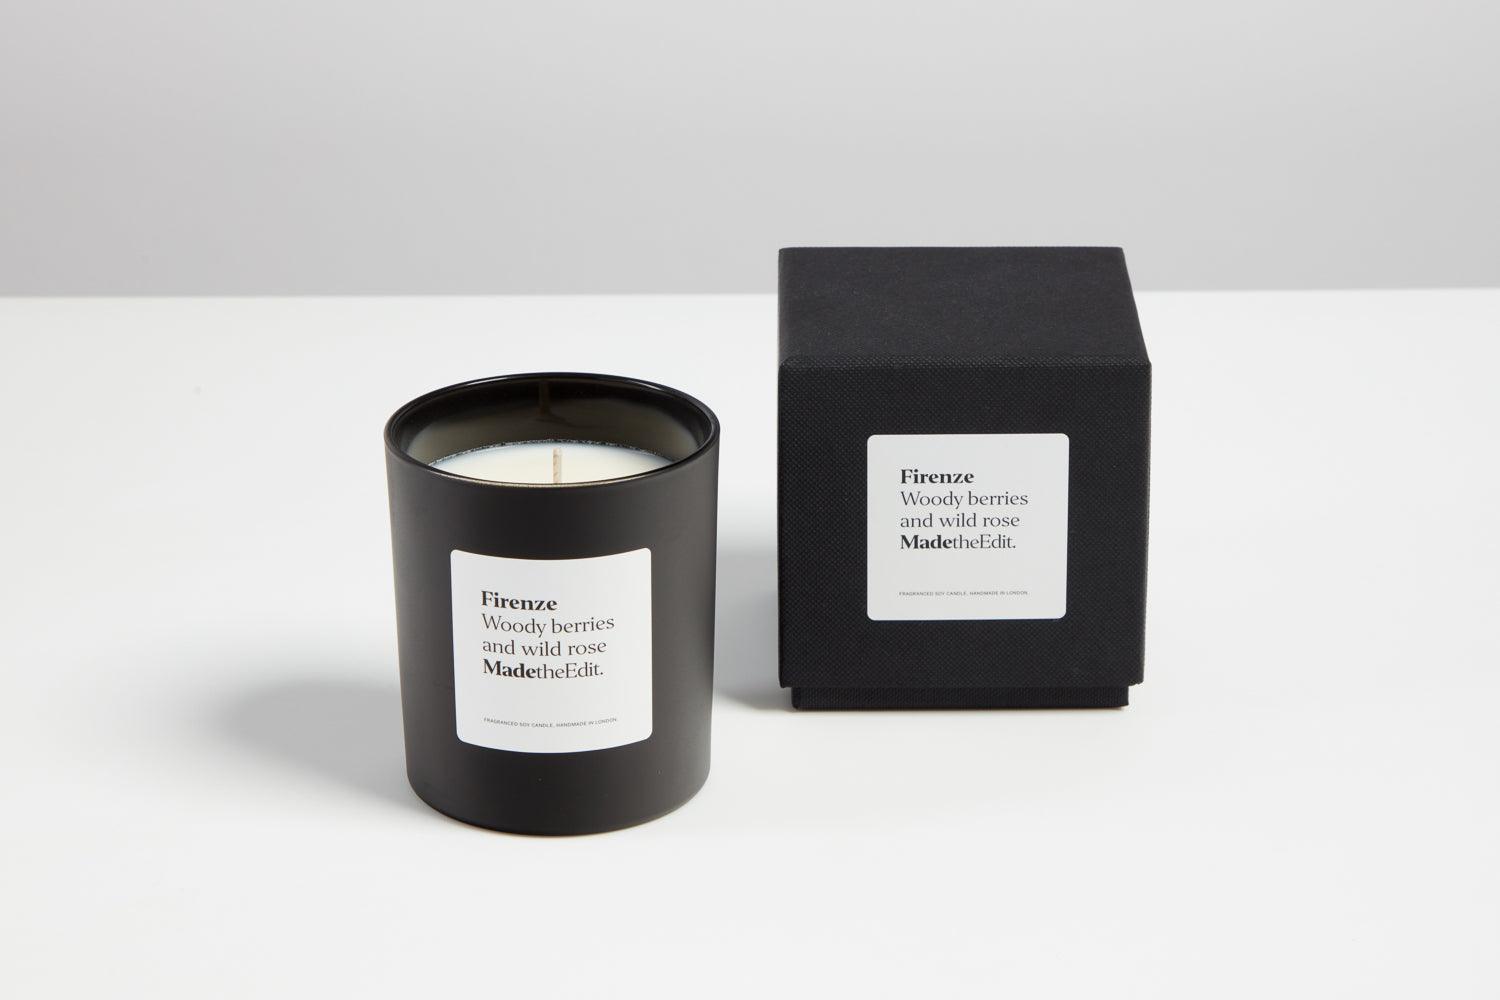 Firenze woody berries and wild rose candle - MADE THE EDIT